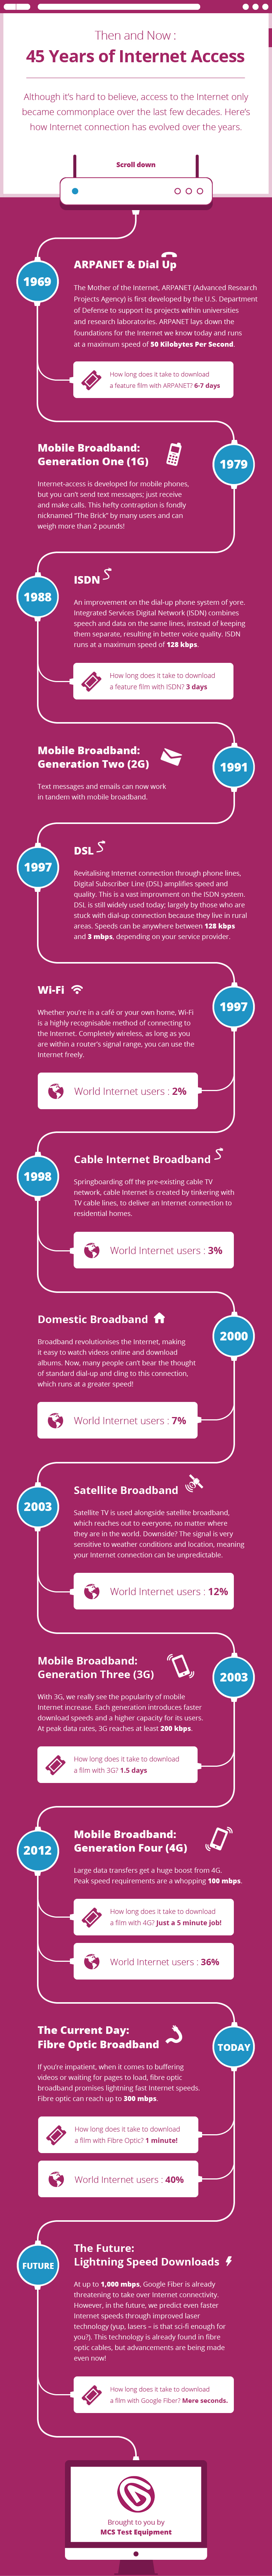 45 Years of Internet Access